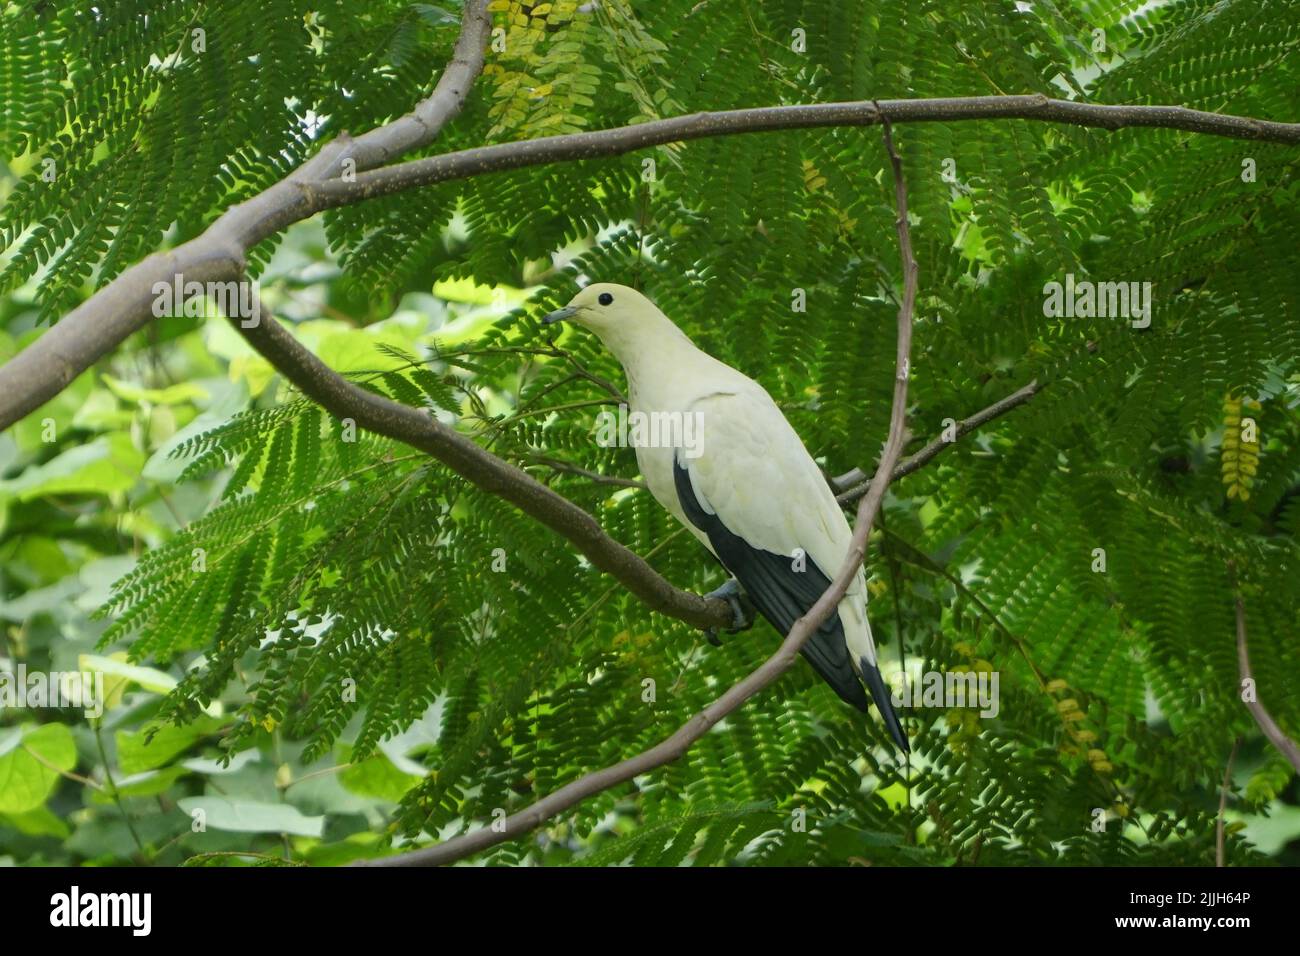 An adorable Pied imperial pigeon perched on Phyllanthus acidus tree branch Stock Photo